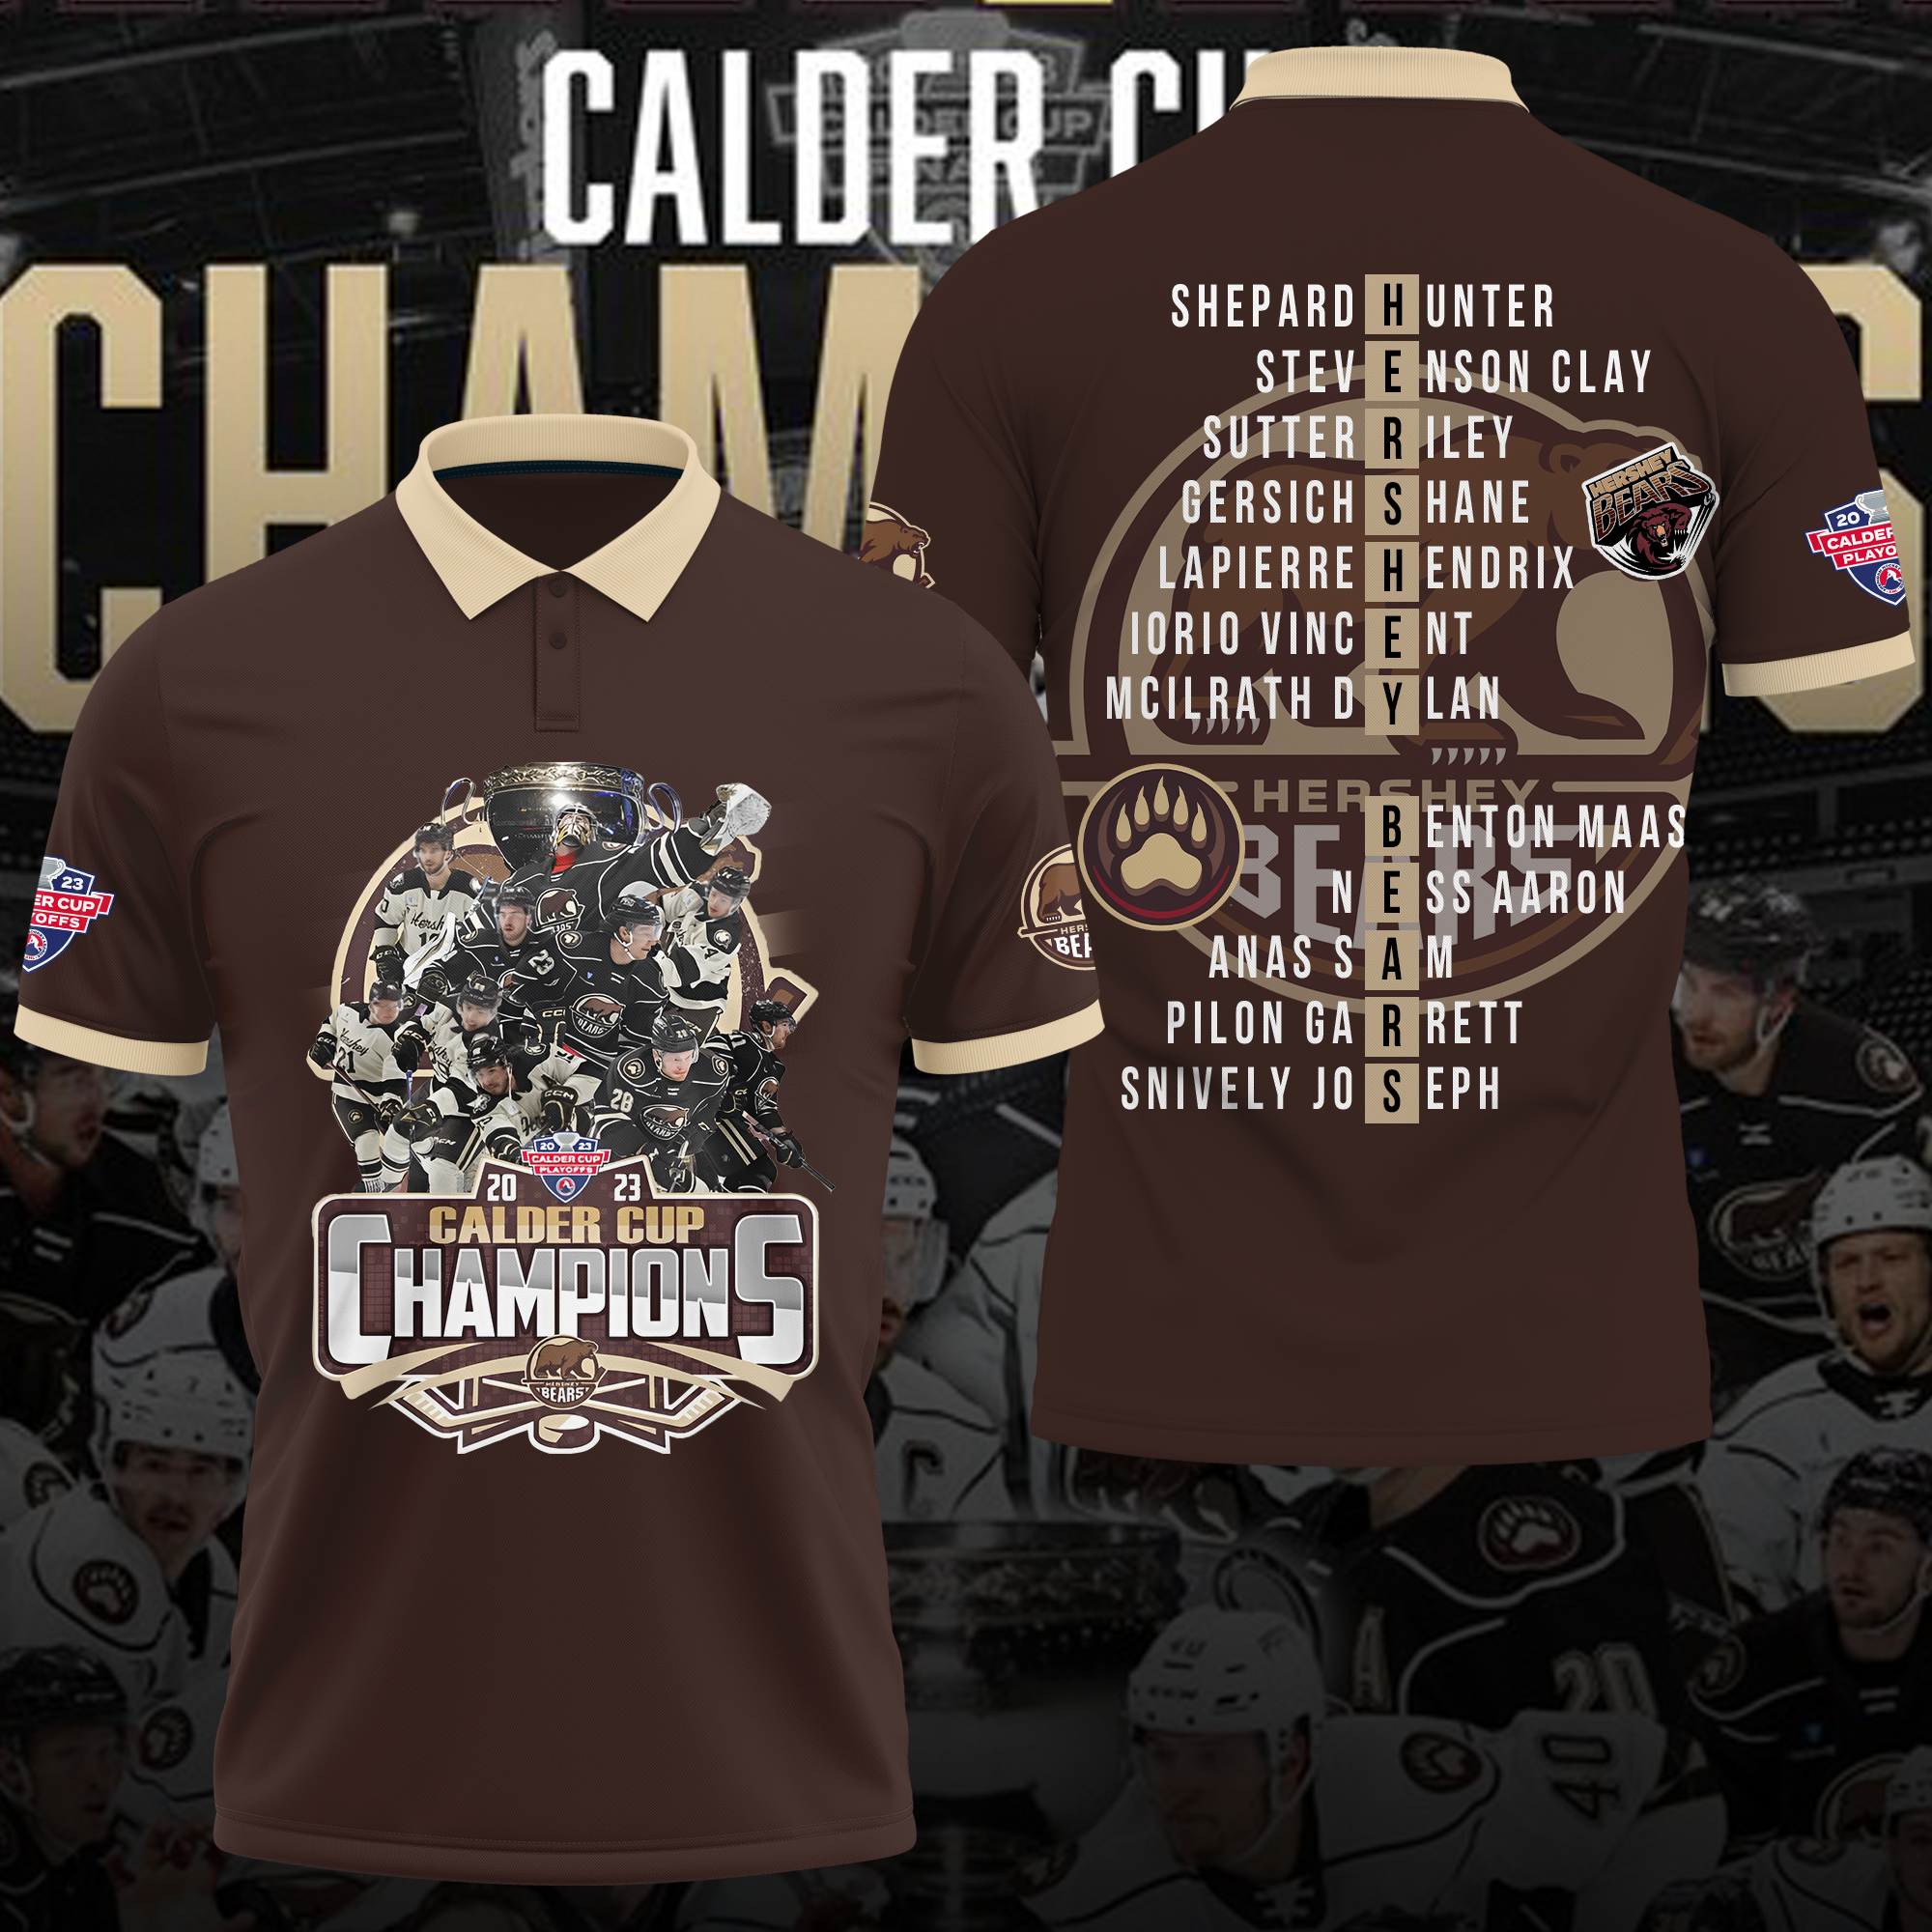 AHL Hershey Bears Mix Jersey Personalized Hoodie in 2023